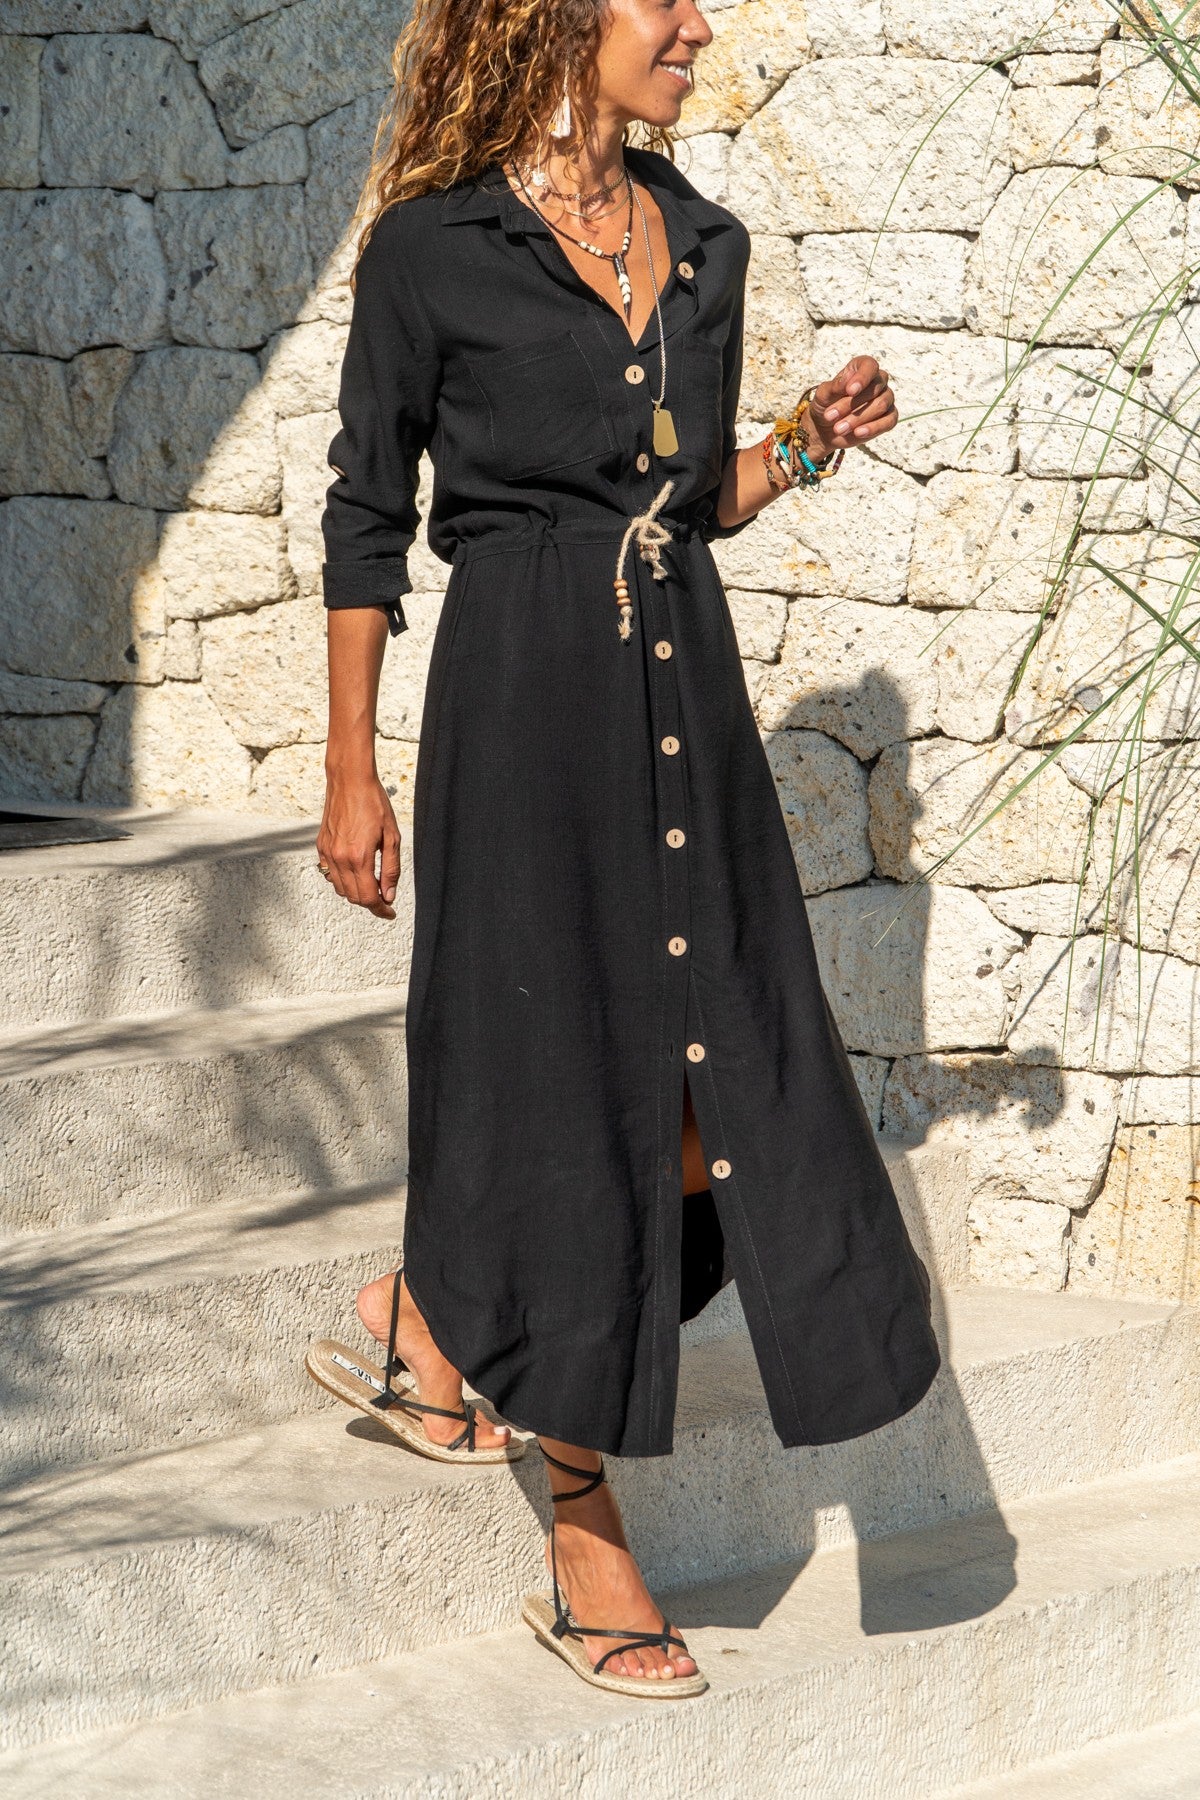 How to style a maxi dress  How to wear a maxi dress over 40